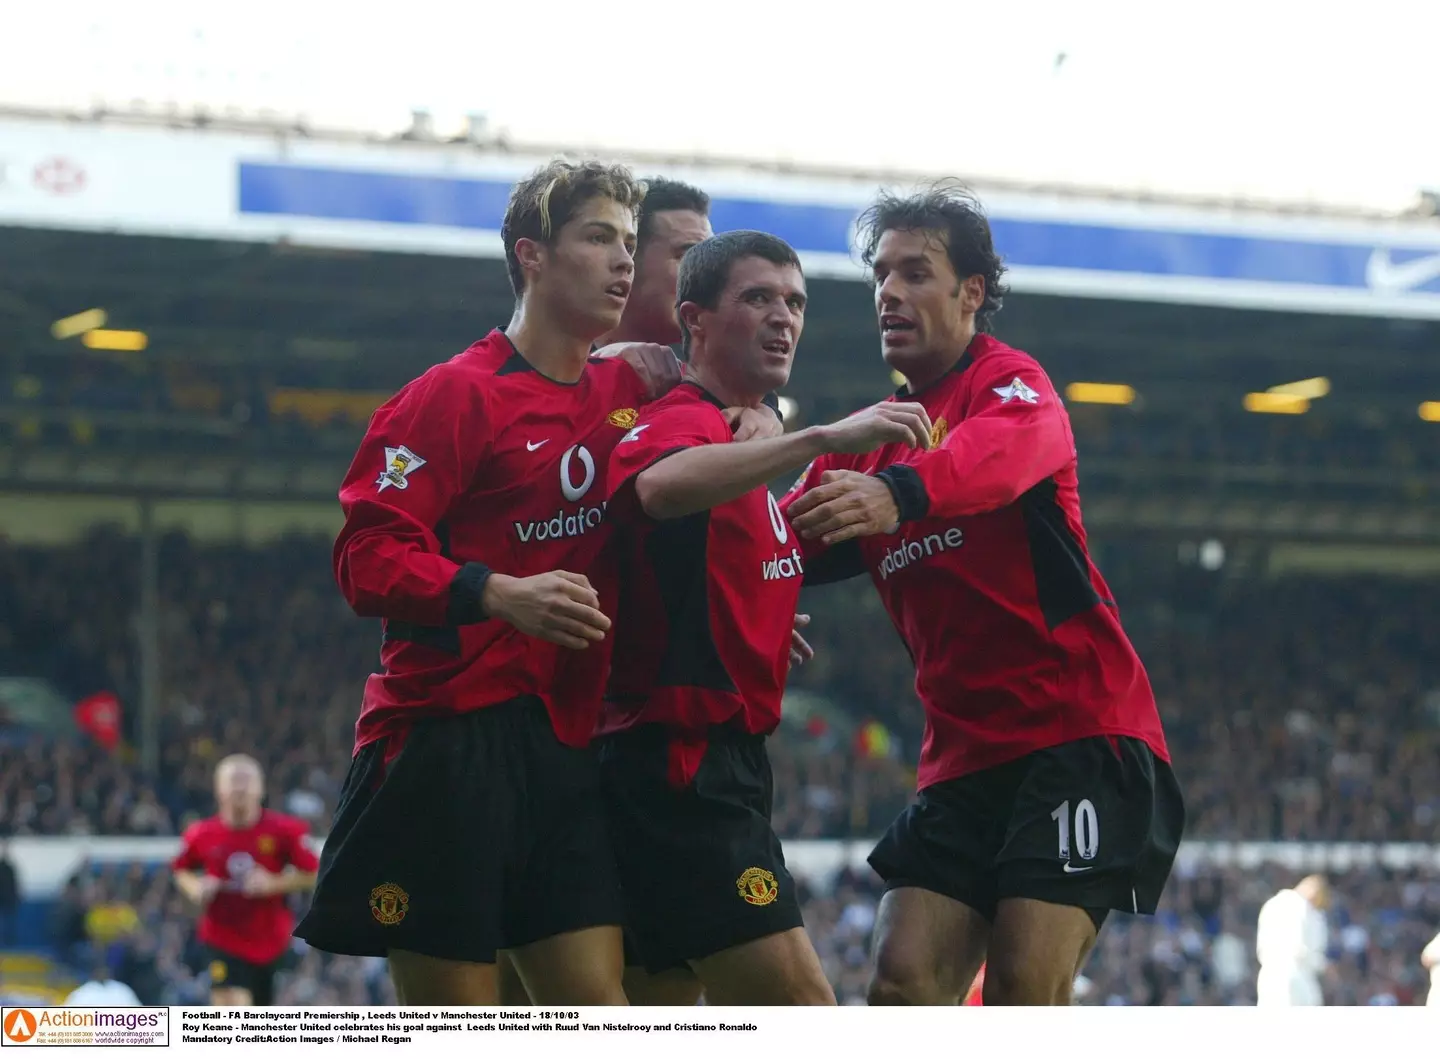 Ronaldo and Keane played together at United. Image: PA Images